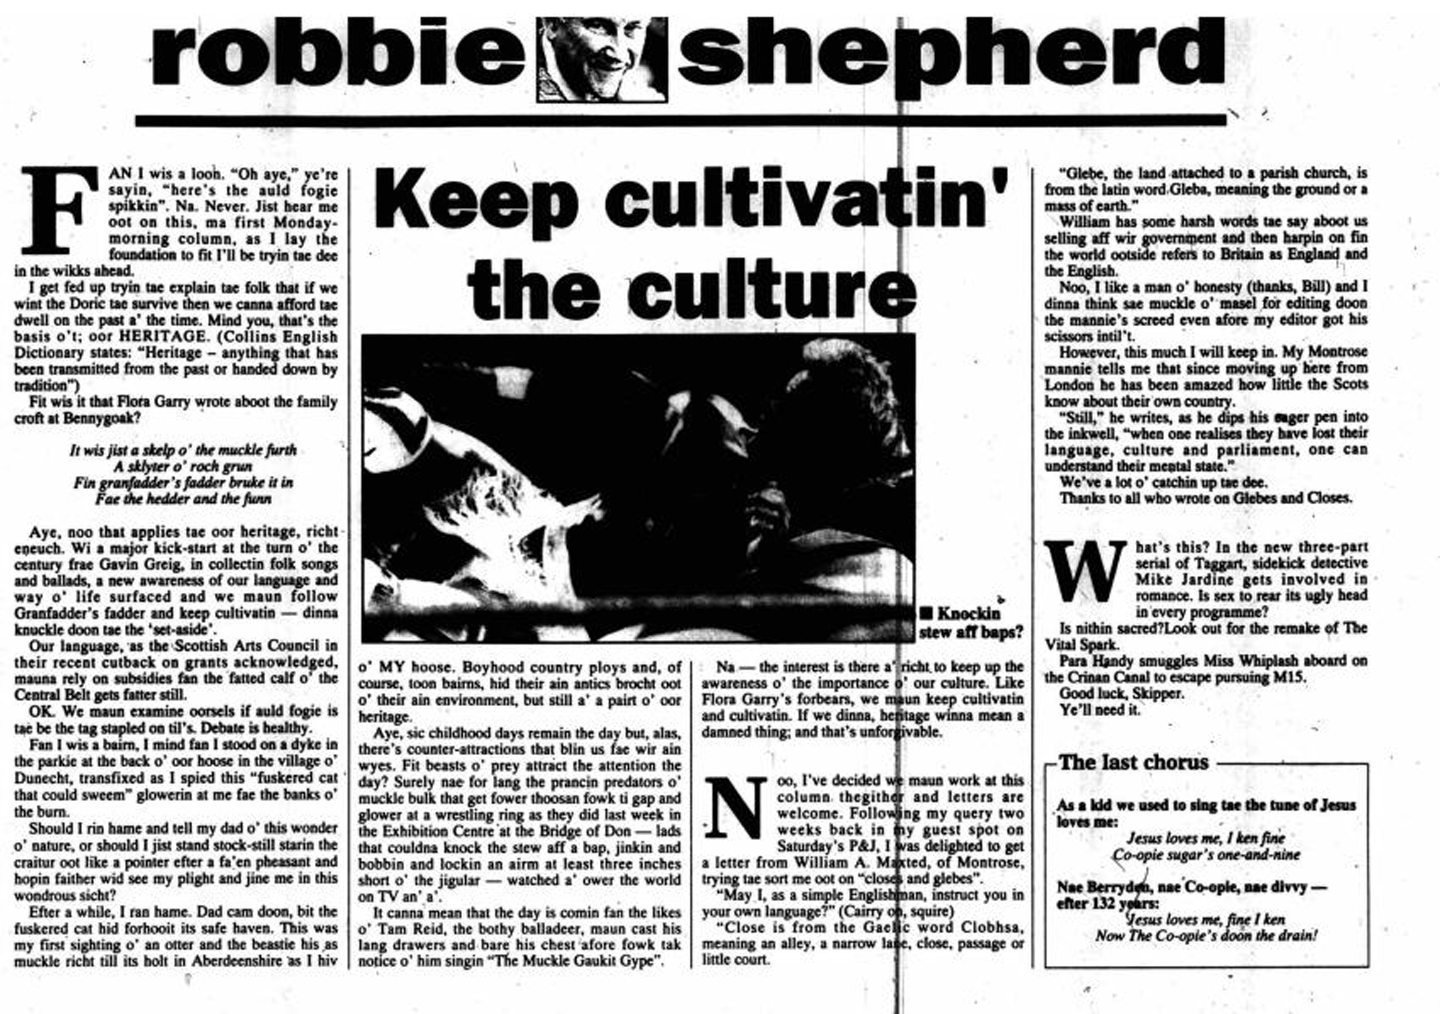 Robbie Shepherd's first column in the Press and Journal.